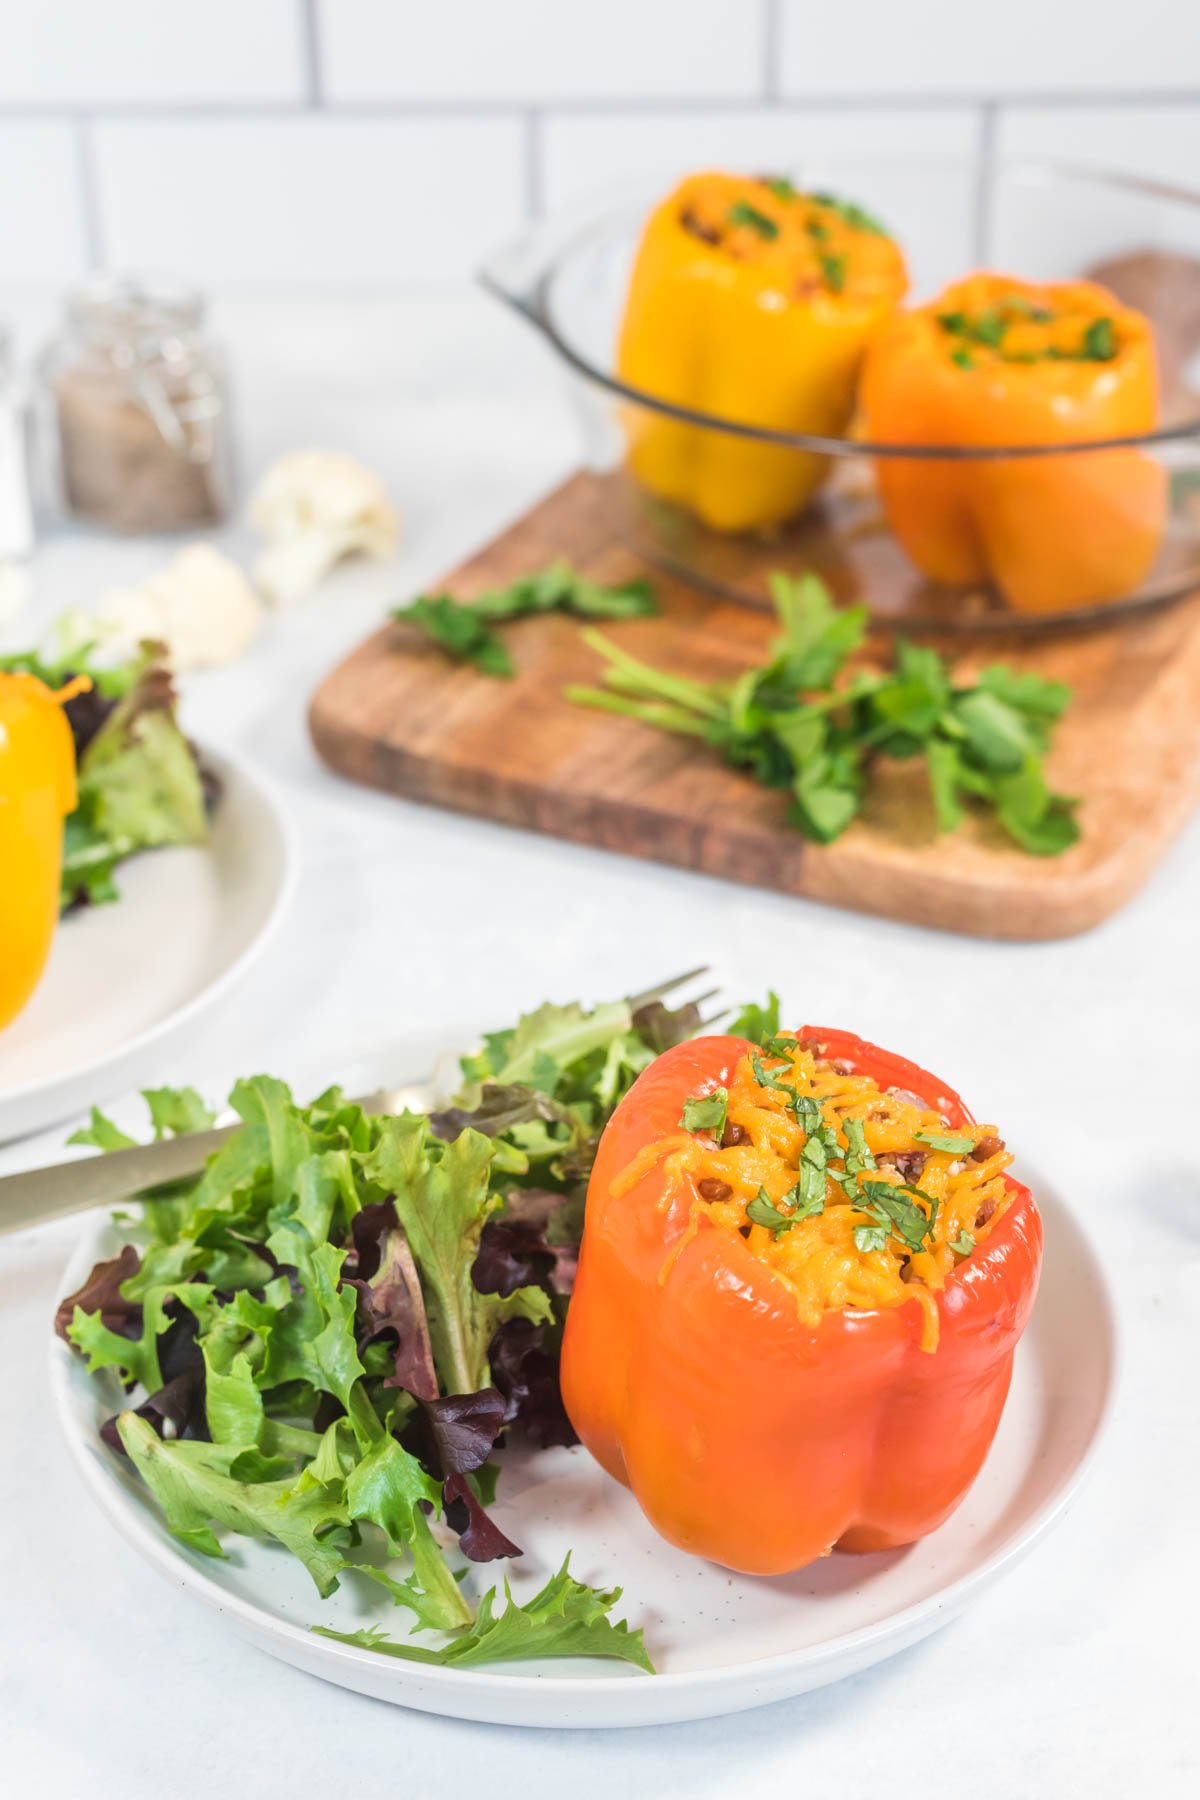 a bell pepper stuffed with spiced cauliflower rice and topped with cheese served on a white plate with a simple side salad